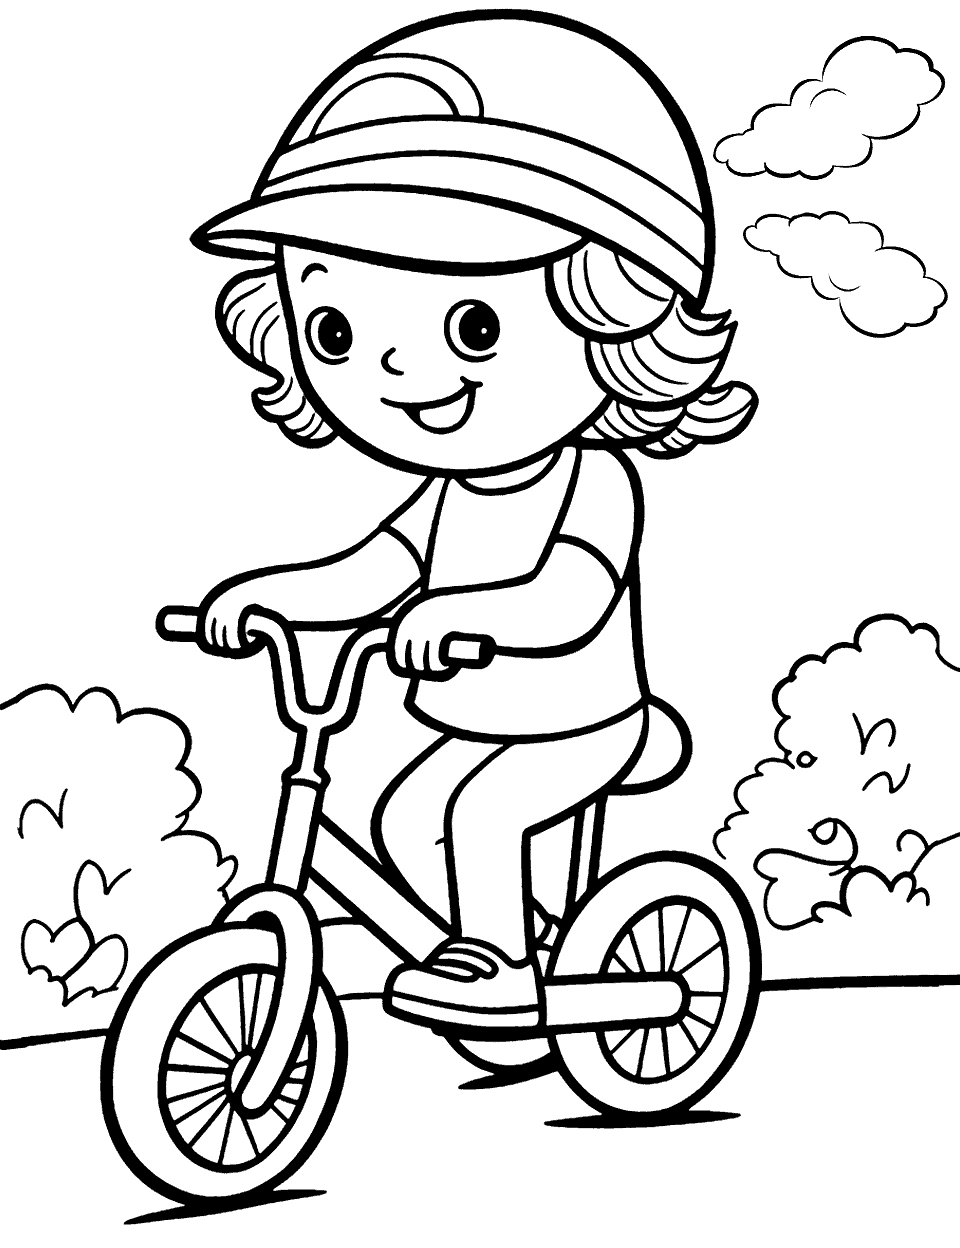 First Bike Ride Coloring Page - A young child riding a bike for the first time.